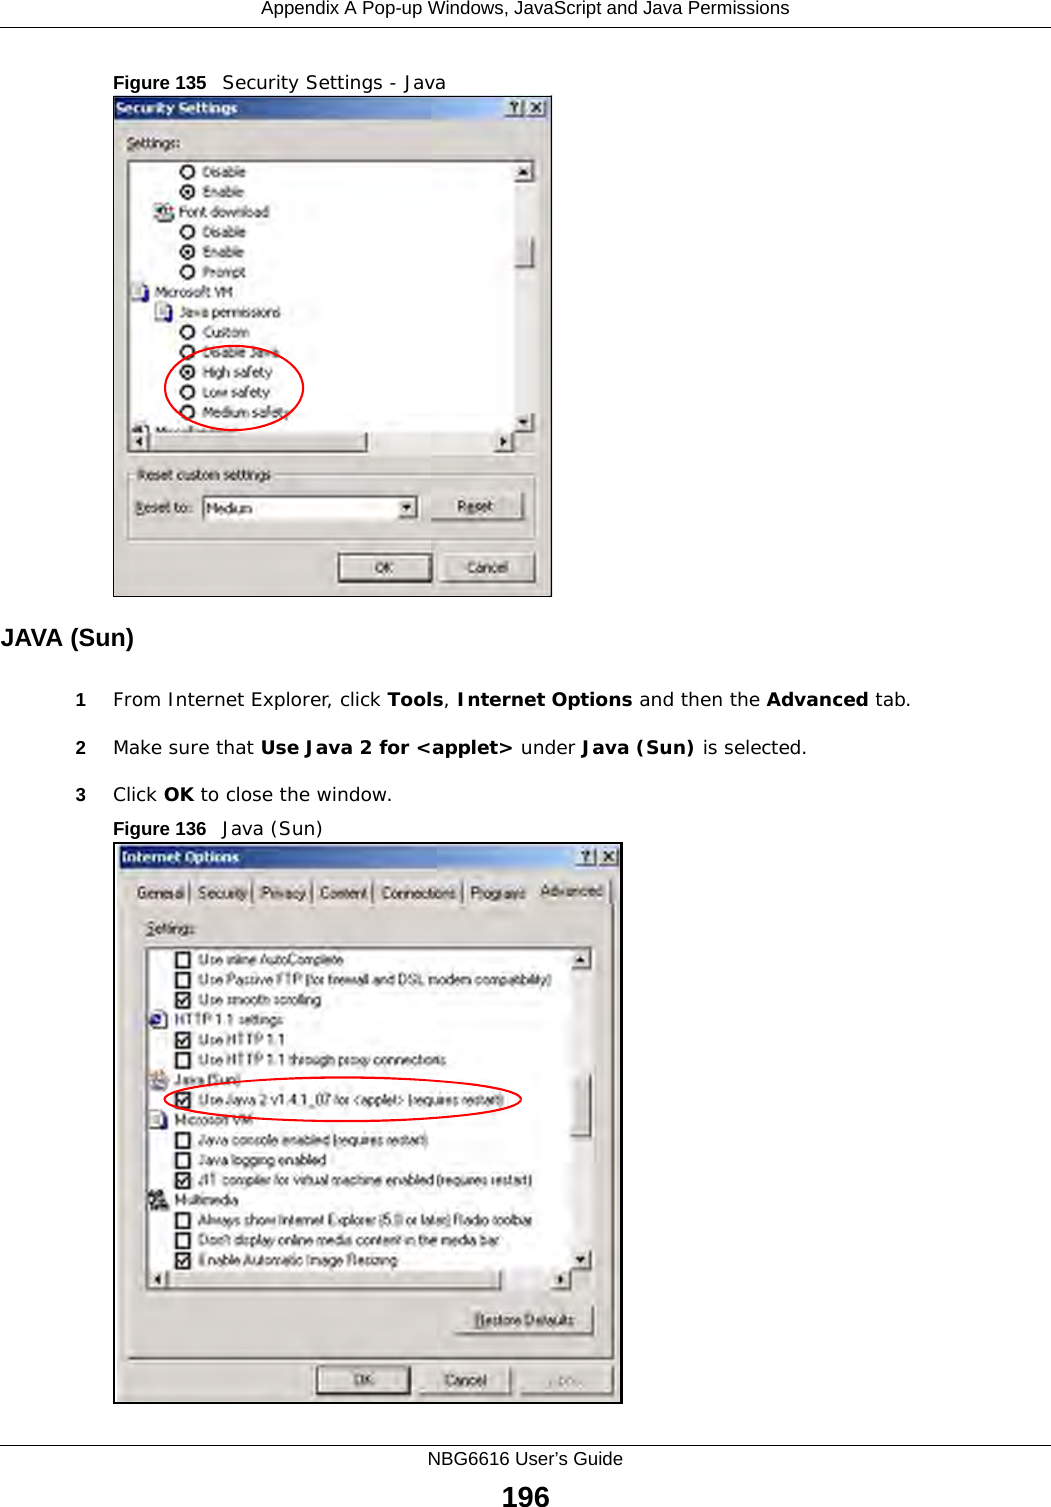 Appendix A Pop-up Windows, JavaScript and Java PermissionsNBG6616 User’s Guide196Figure 135   Security Settings - Java JAVA (Sun)1From Internet Explorer, click Tools, Internet Options and then the Advanced tab. 2Make sure that Use Java 2 for &lt;applet&gt; under Java (Sun) is selected.3Click OK to close the window.Figure 136   Java (Sun)